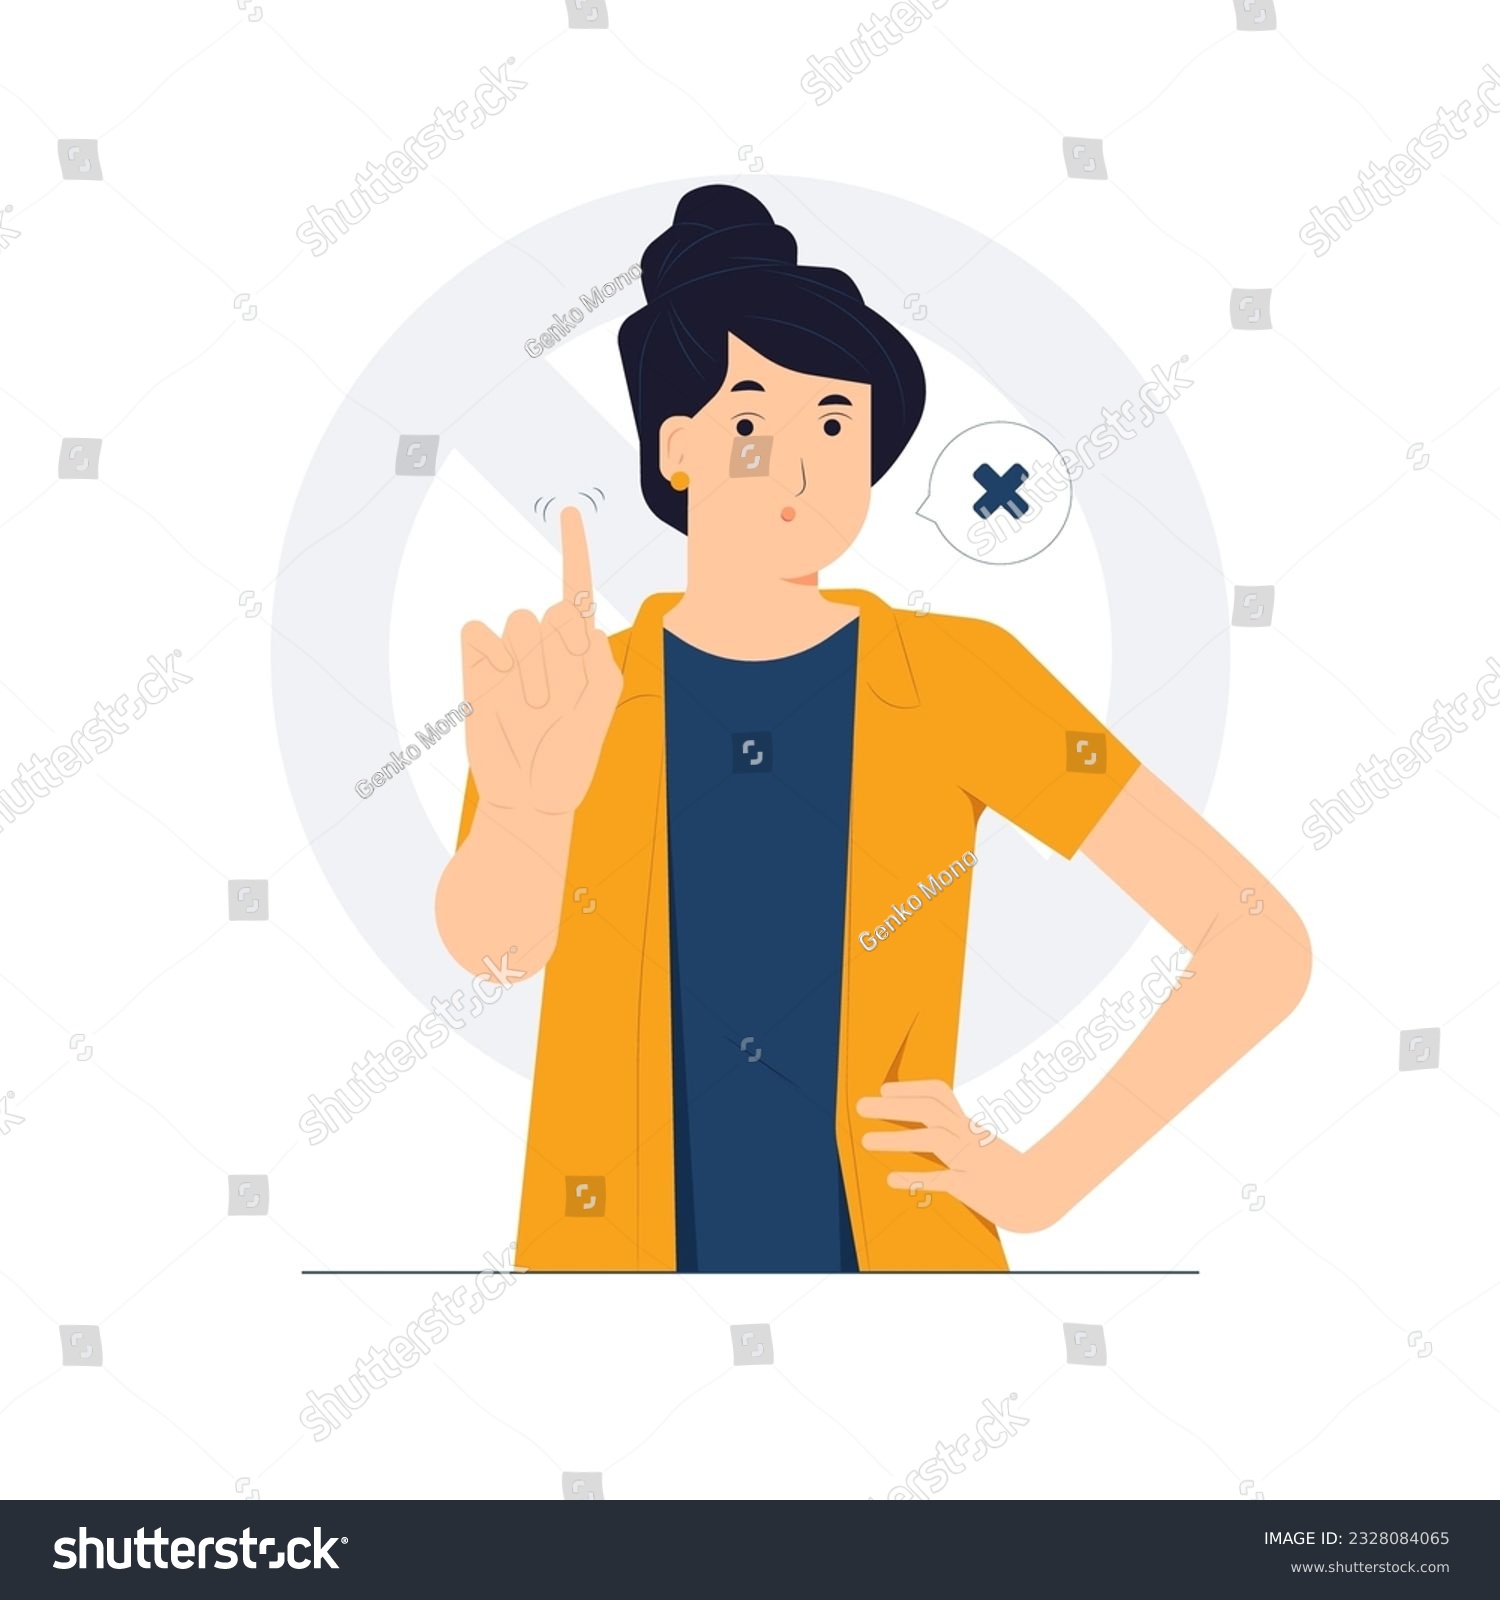 SVG of No and makes stop gesture, forbids disagreement, Body language No means no. Girl says no and showing stop with one finger, taboo sign, deny expression, and angry grumpy ban concept illustration svg